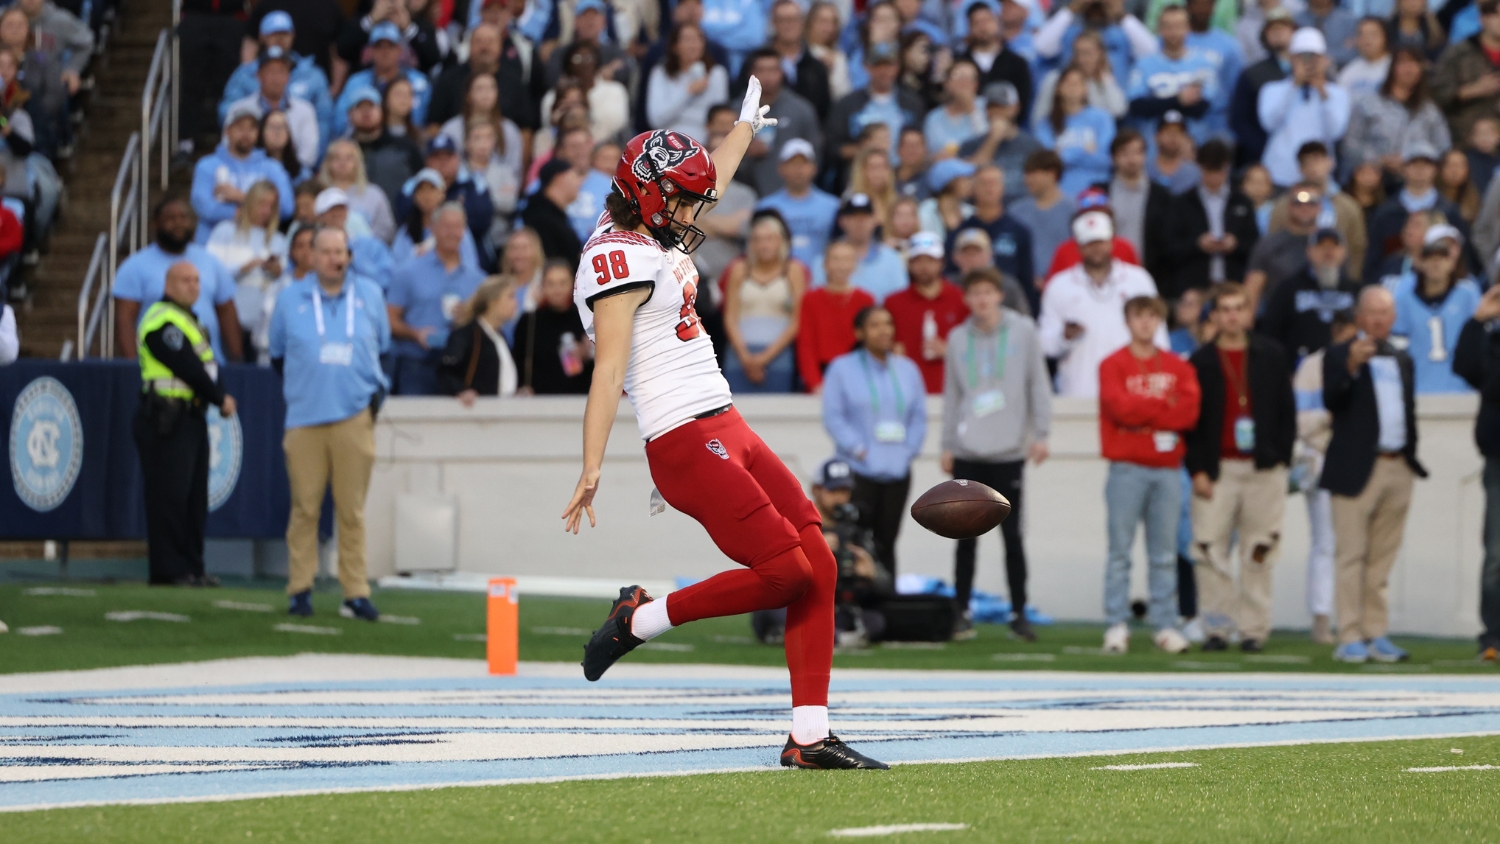 Caden Noonkester punts at an NC State vs UNC football game